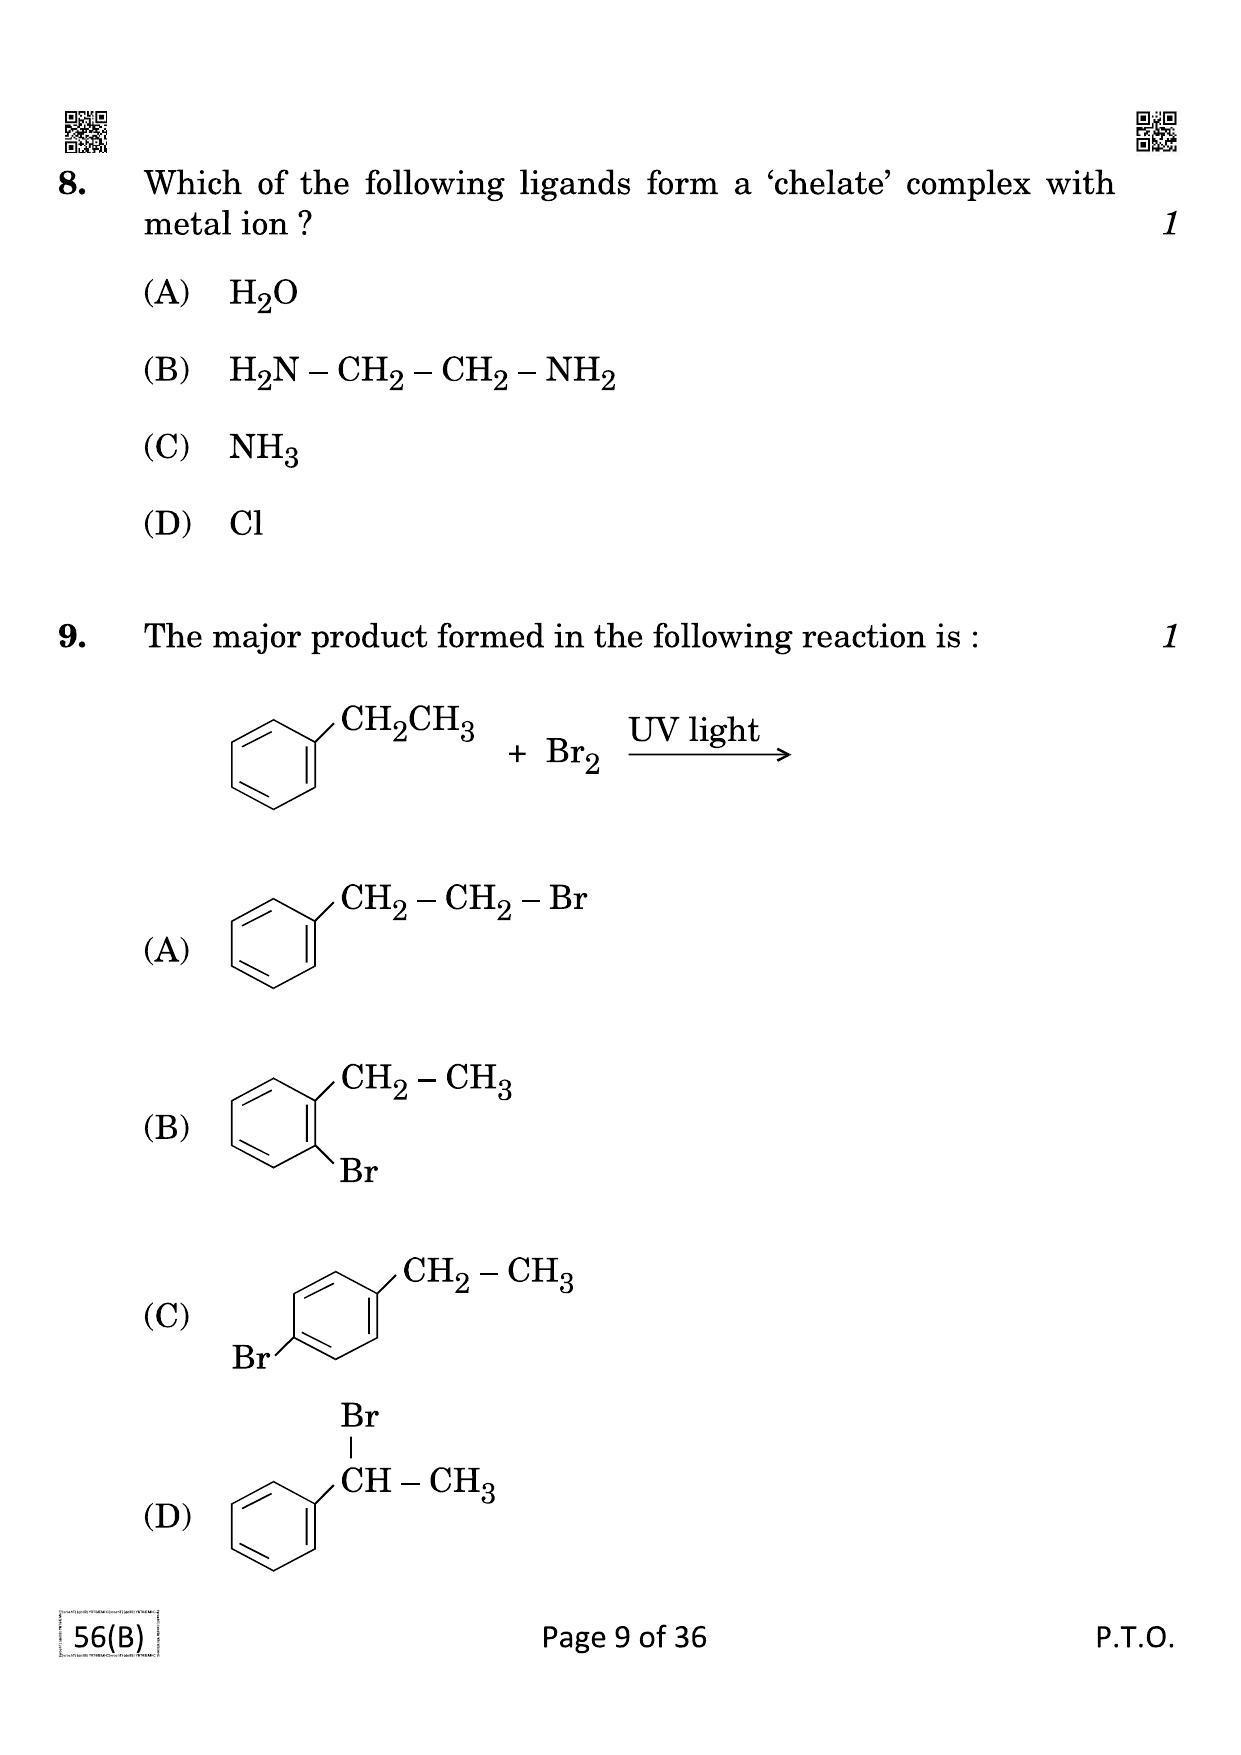 CBSE Class 12 QP_043_CHEMISTRY_FOR_BLIND_CANDIDATES 2021 Compartment Question Paper - Page 9